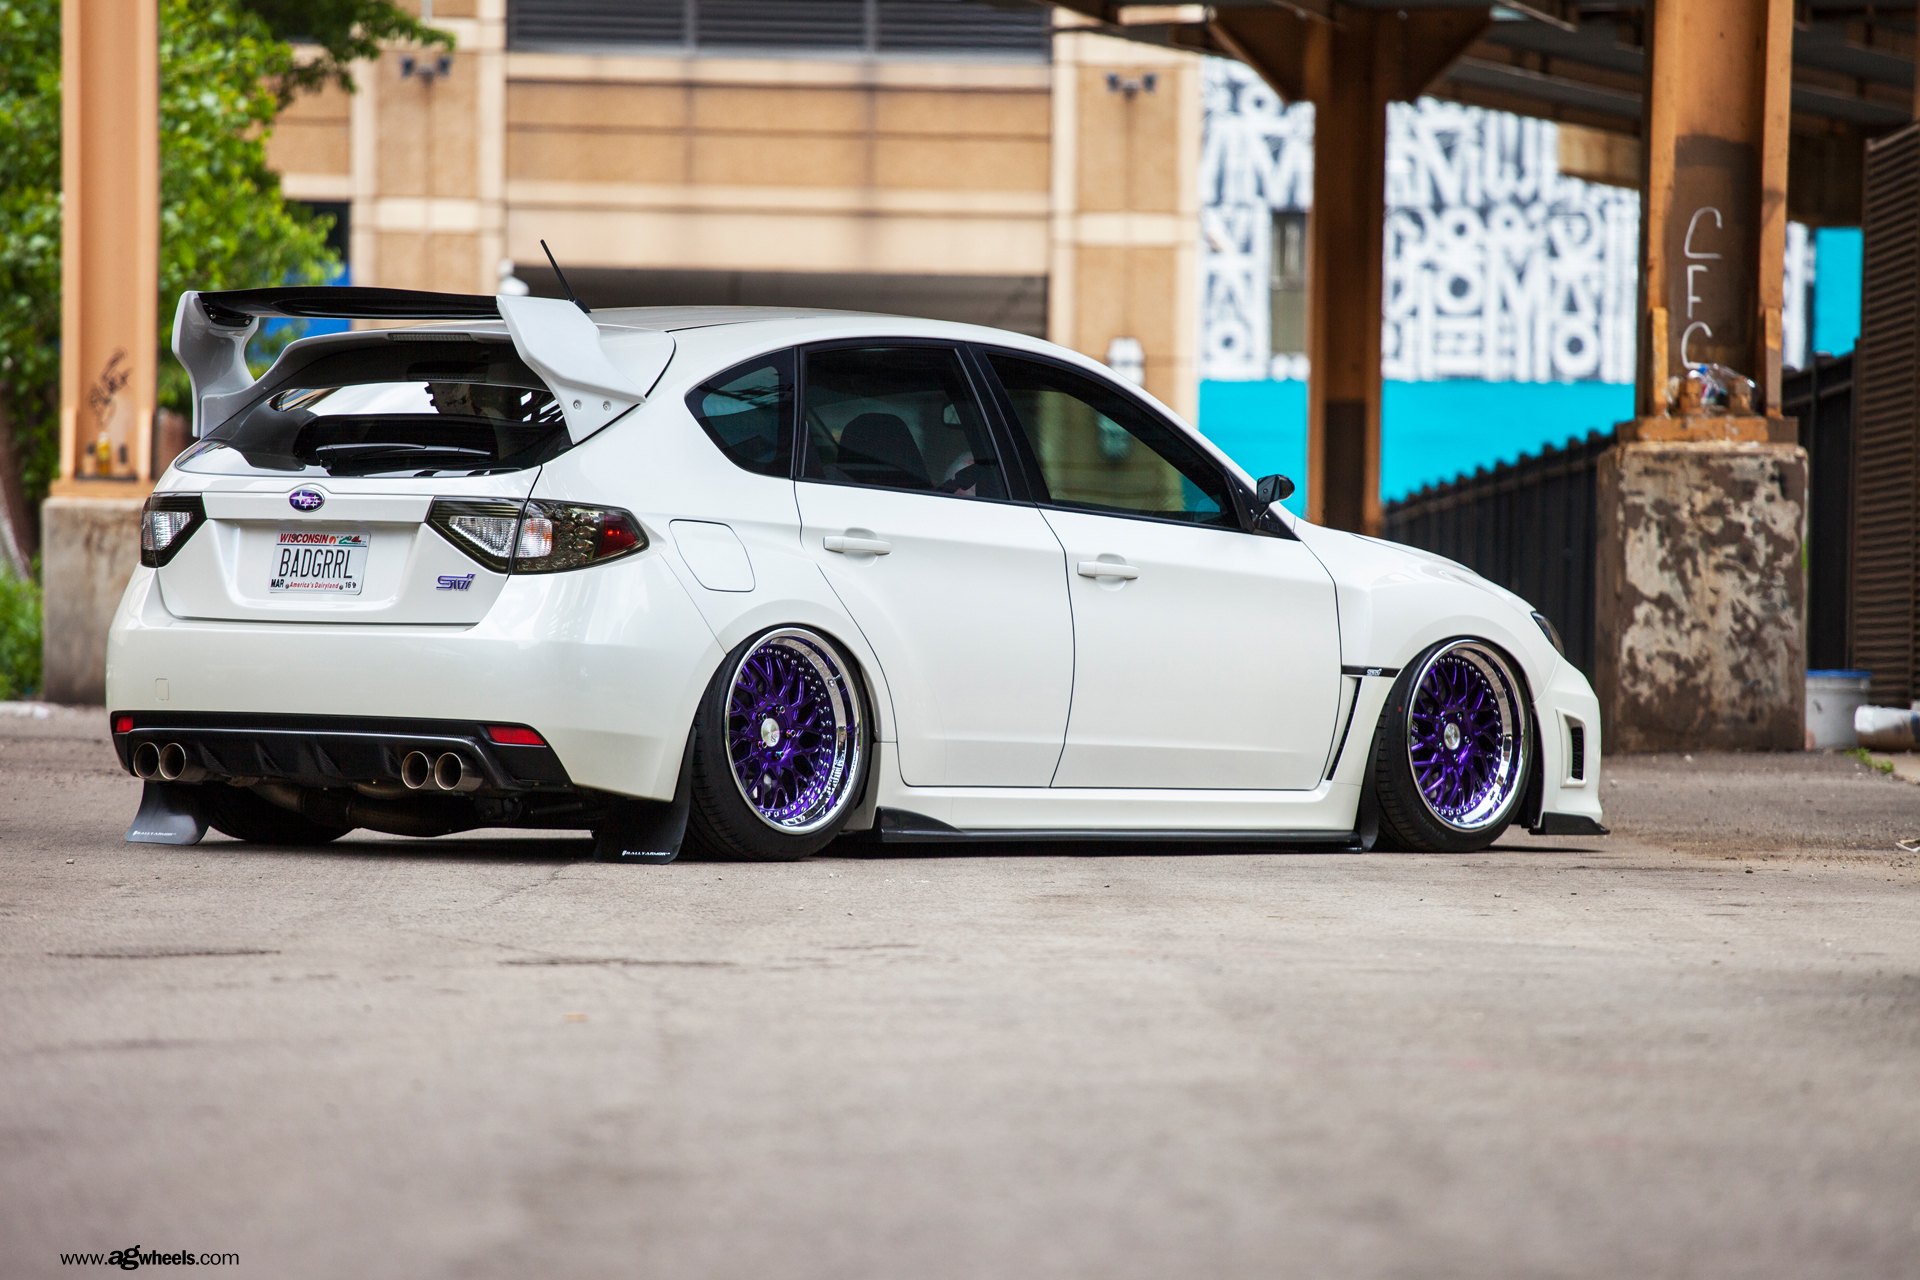 Amazing Transformation of White Stanced Subaru WRX with Custom Parts and Pu...